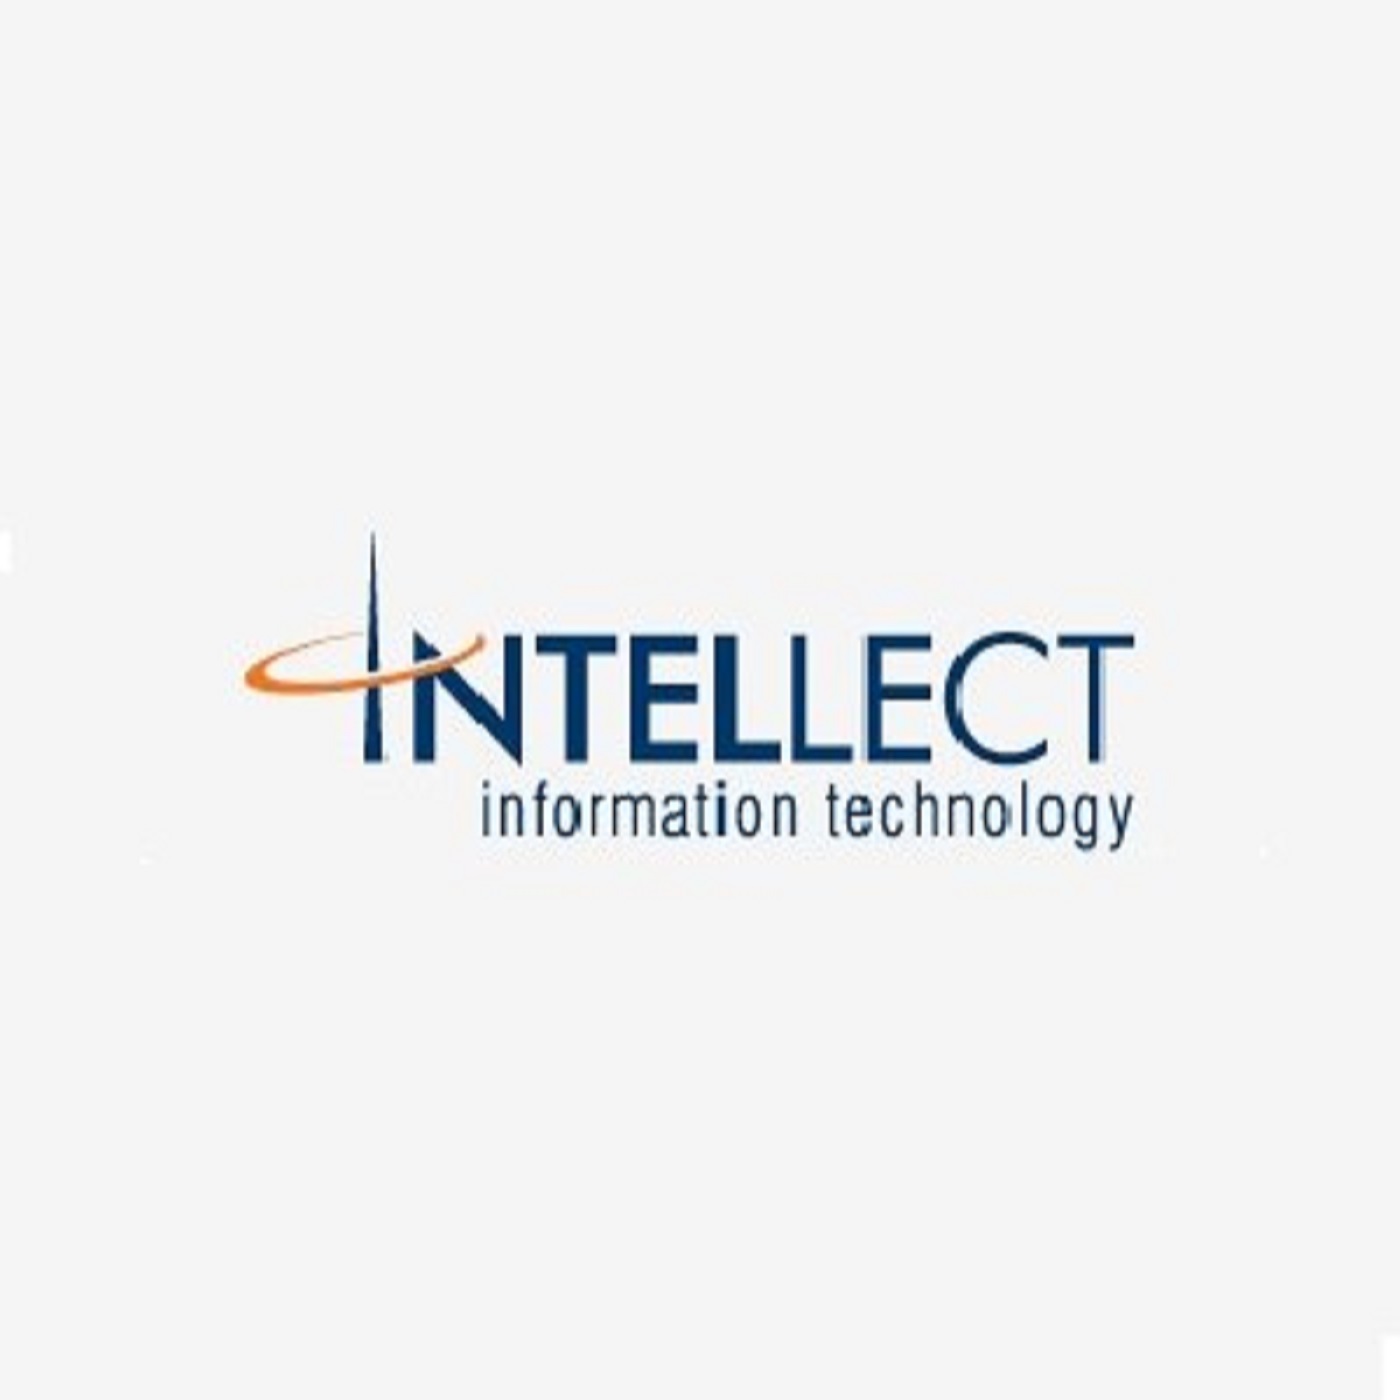 Intellect IT provides specialist expertise and service to